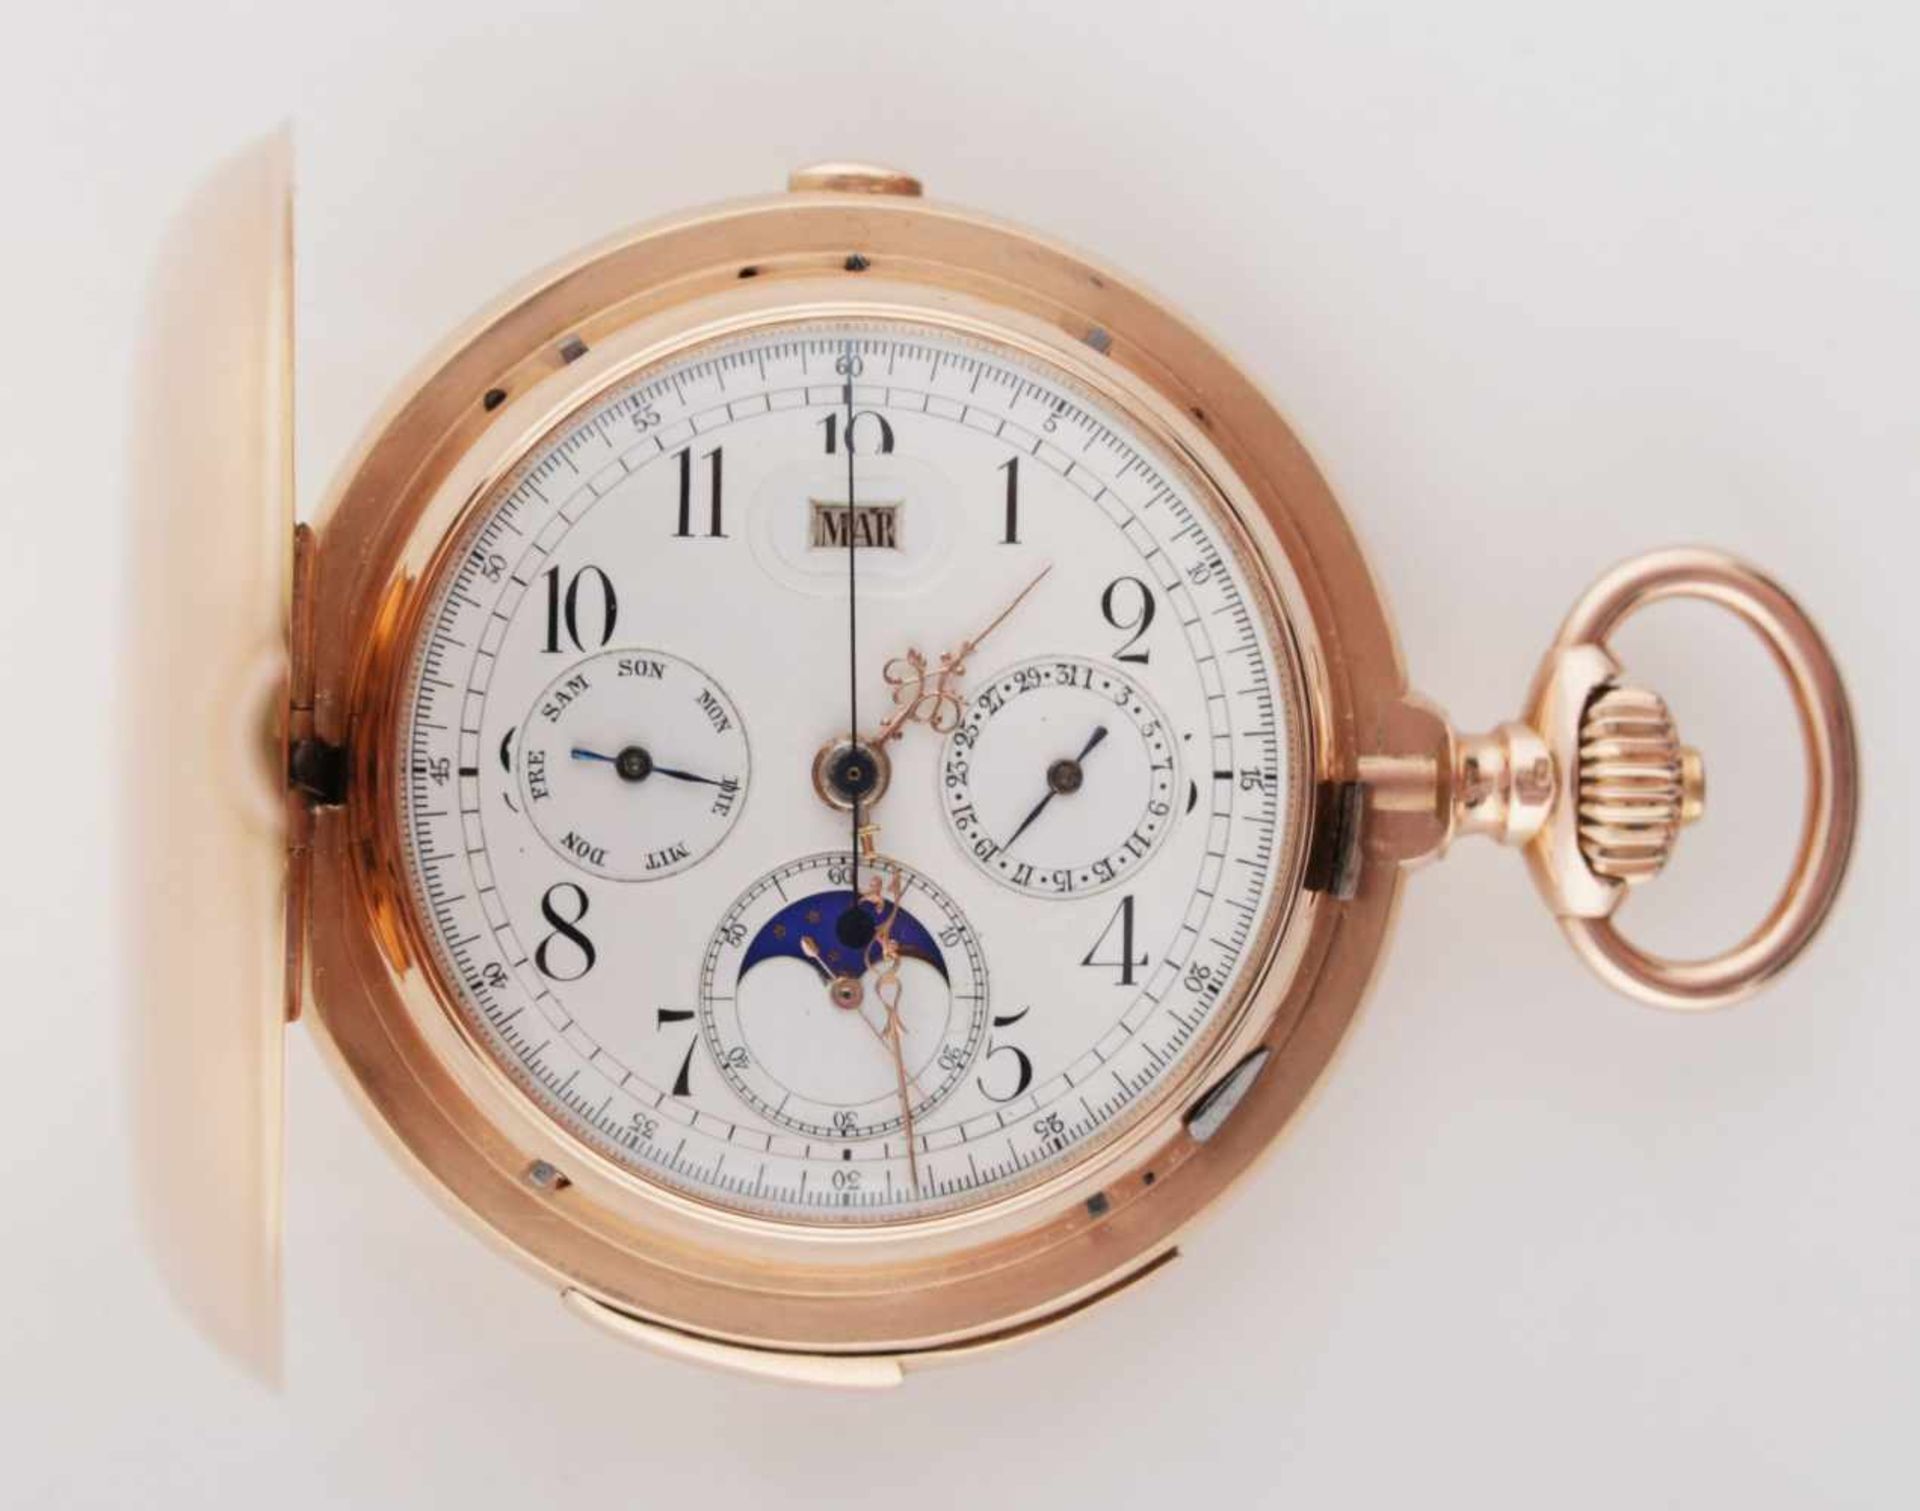 Gold chronograph with date and lunar indicator and gong Early 20th century, the massive pocket watch